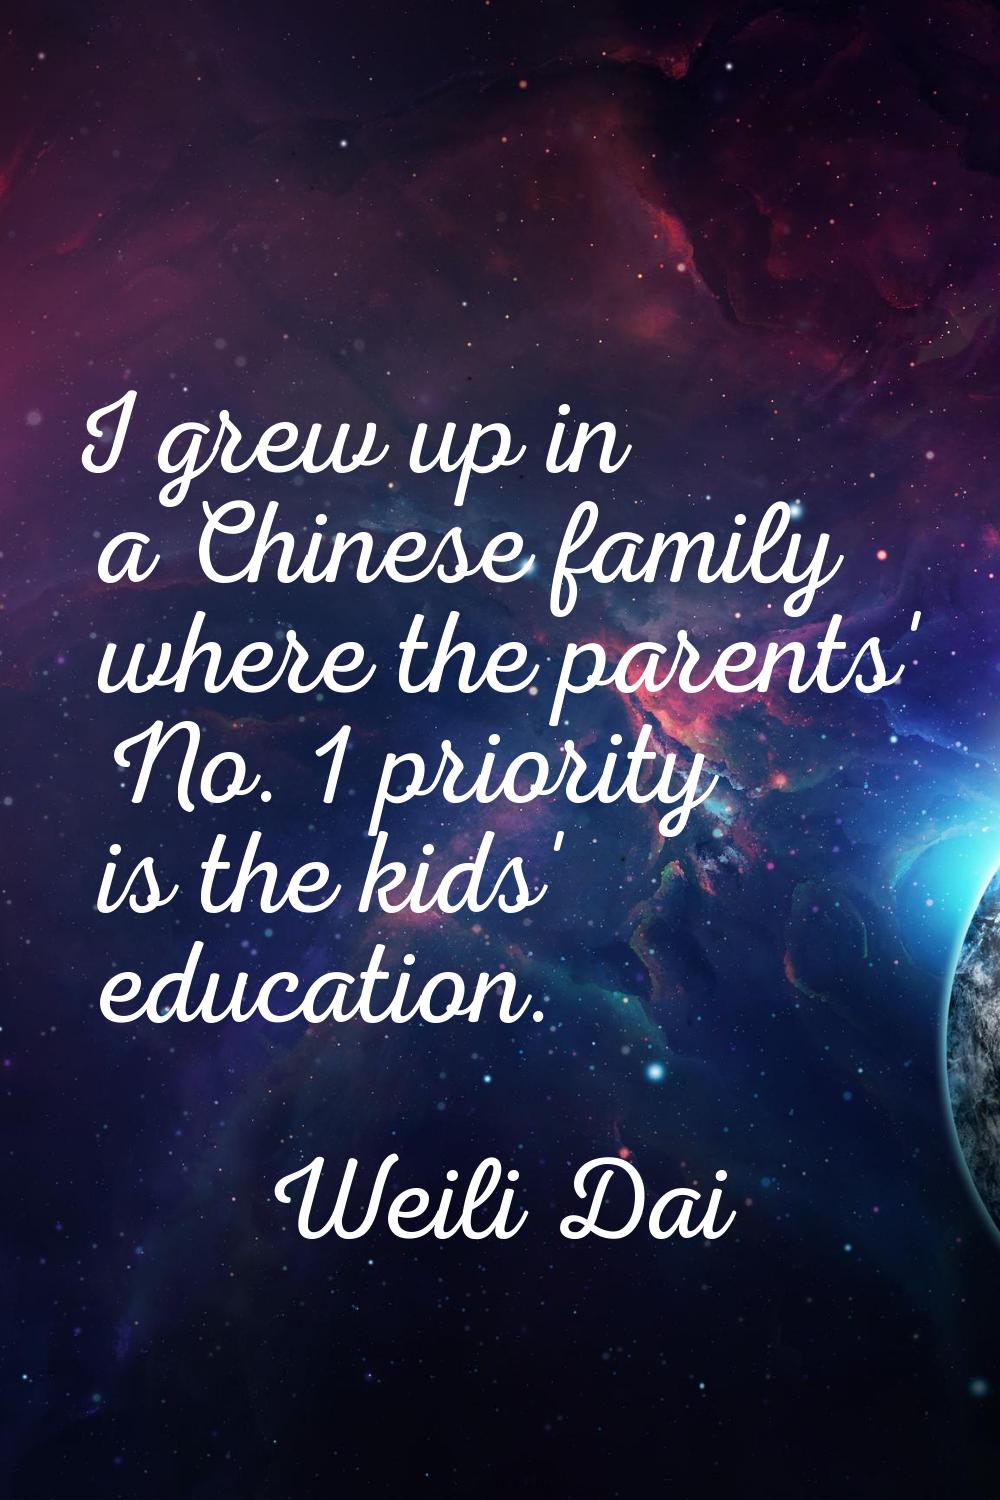 I grew up in a Chinese family where the parents' No. 1 priority is the kids' education.